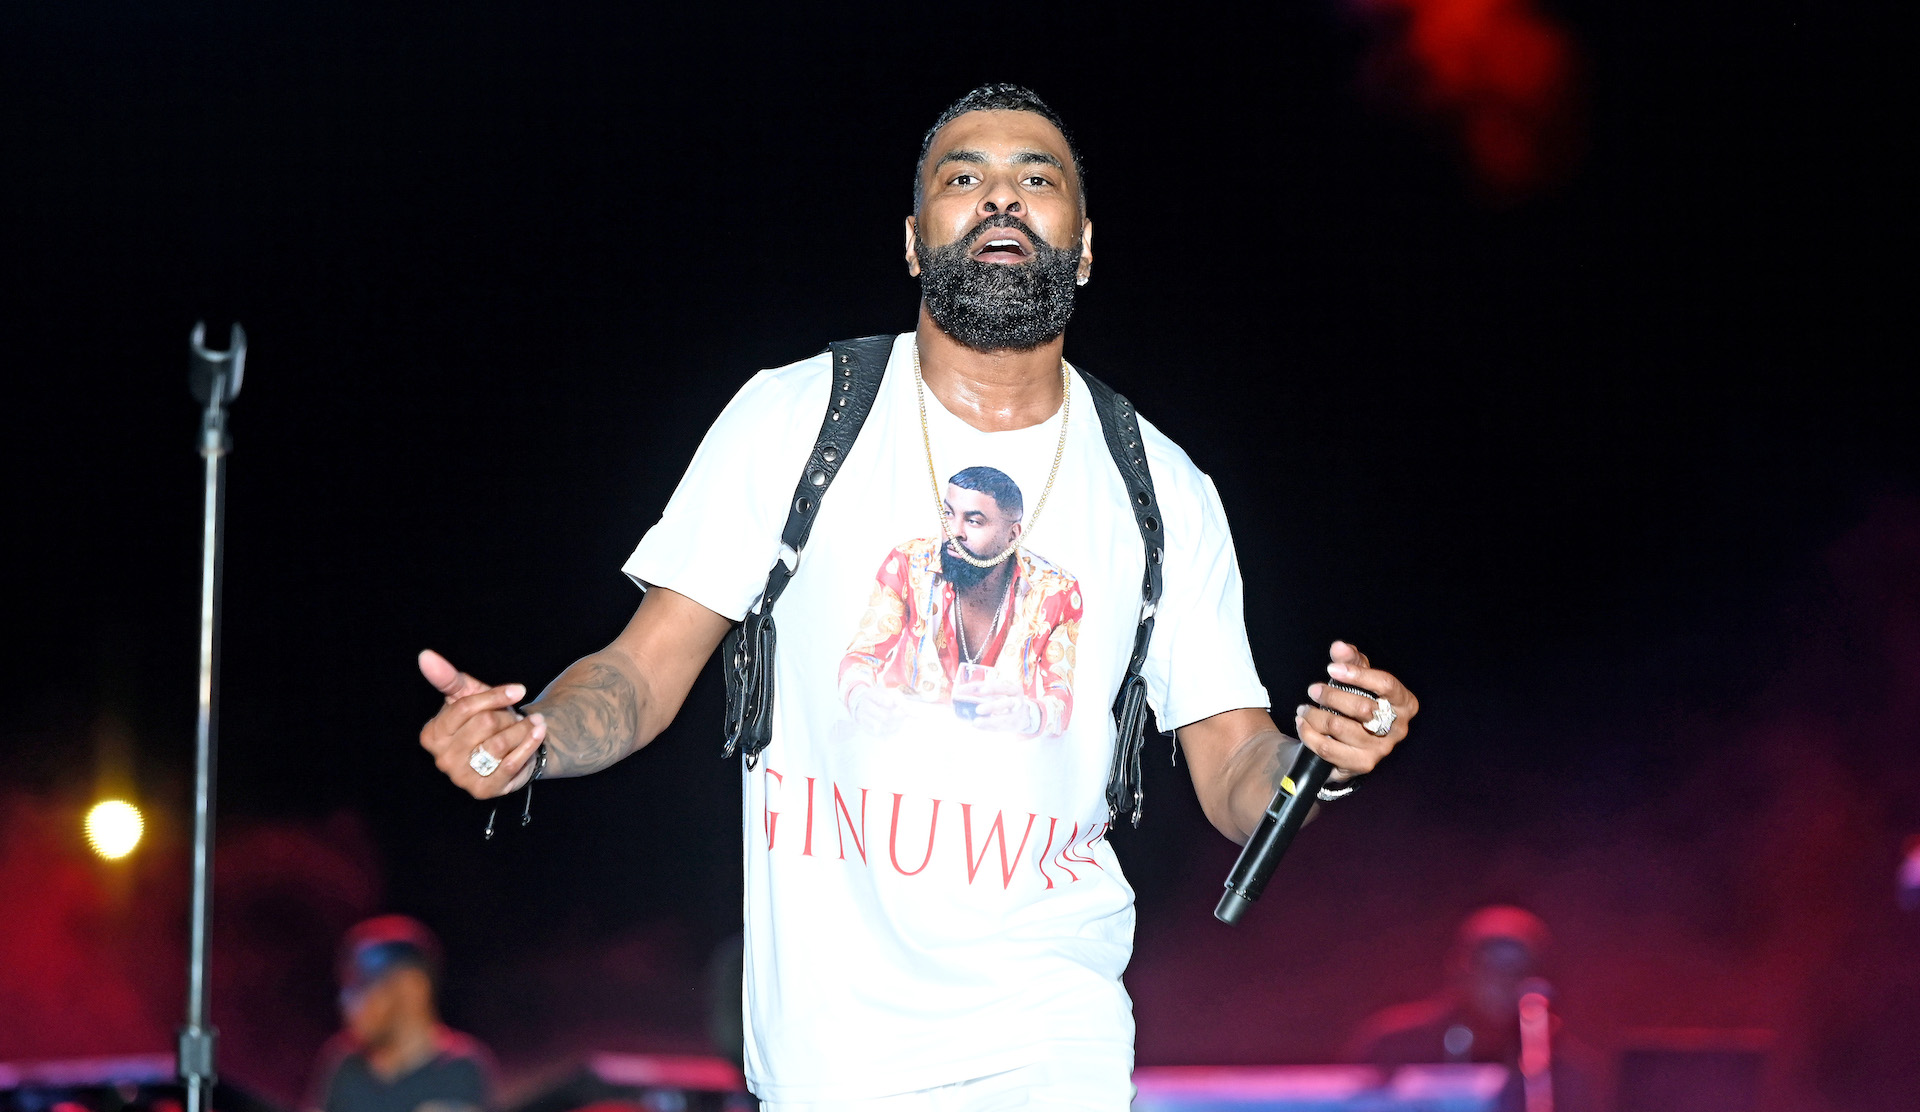 Ginuwine Addresses Becoming a Meme After Video of His Dance Moves Go Viral